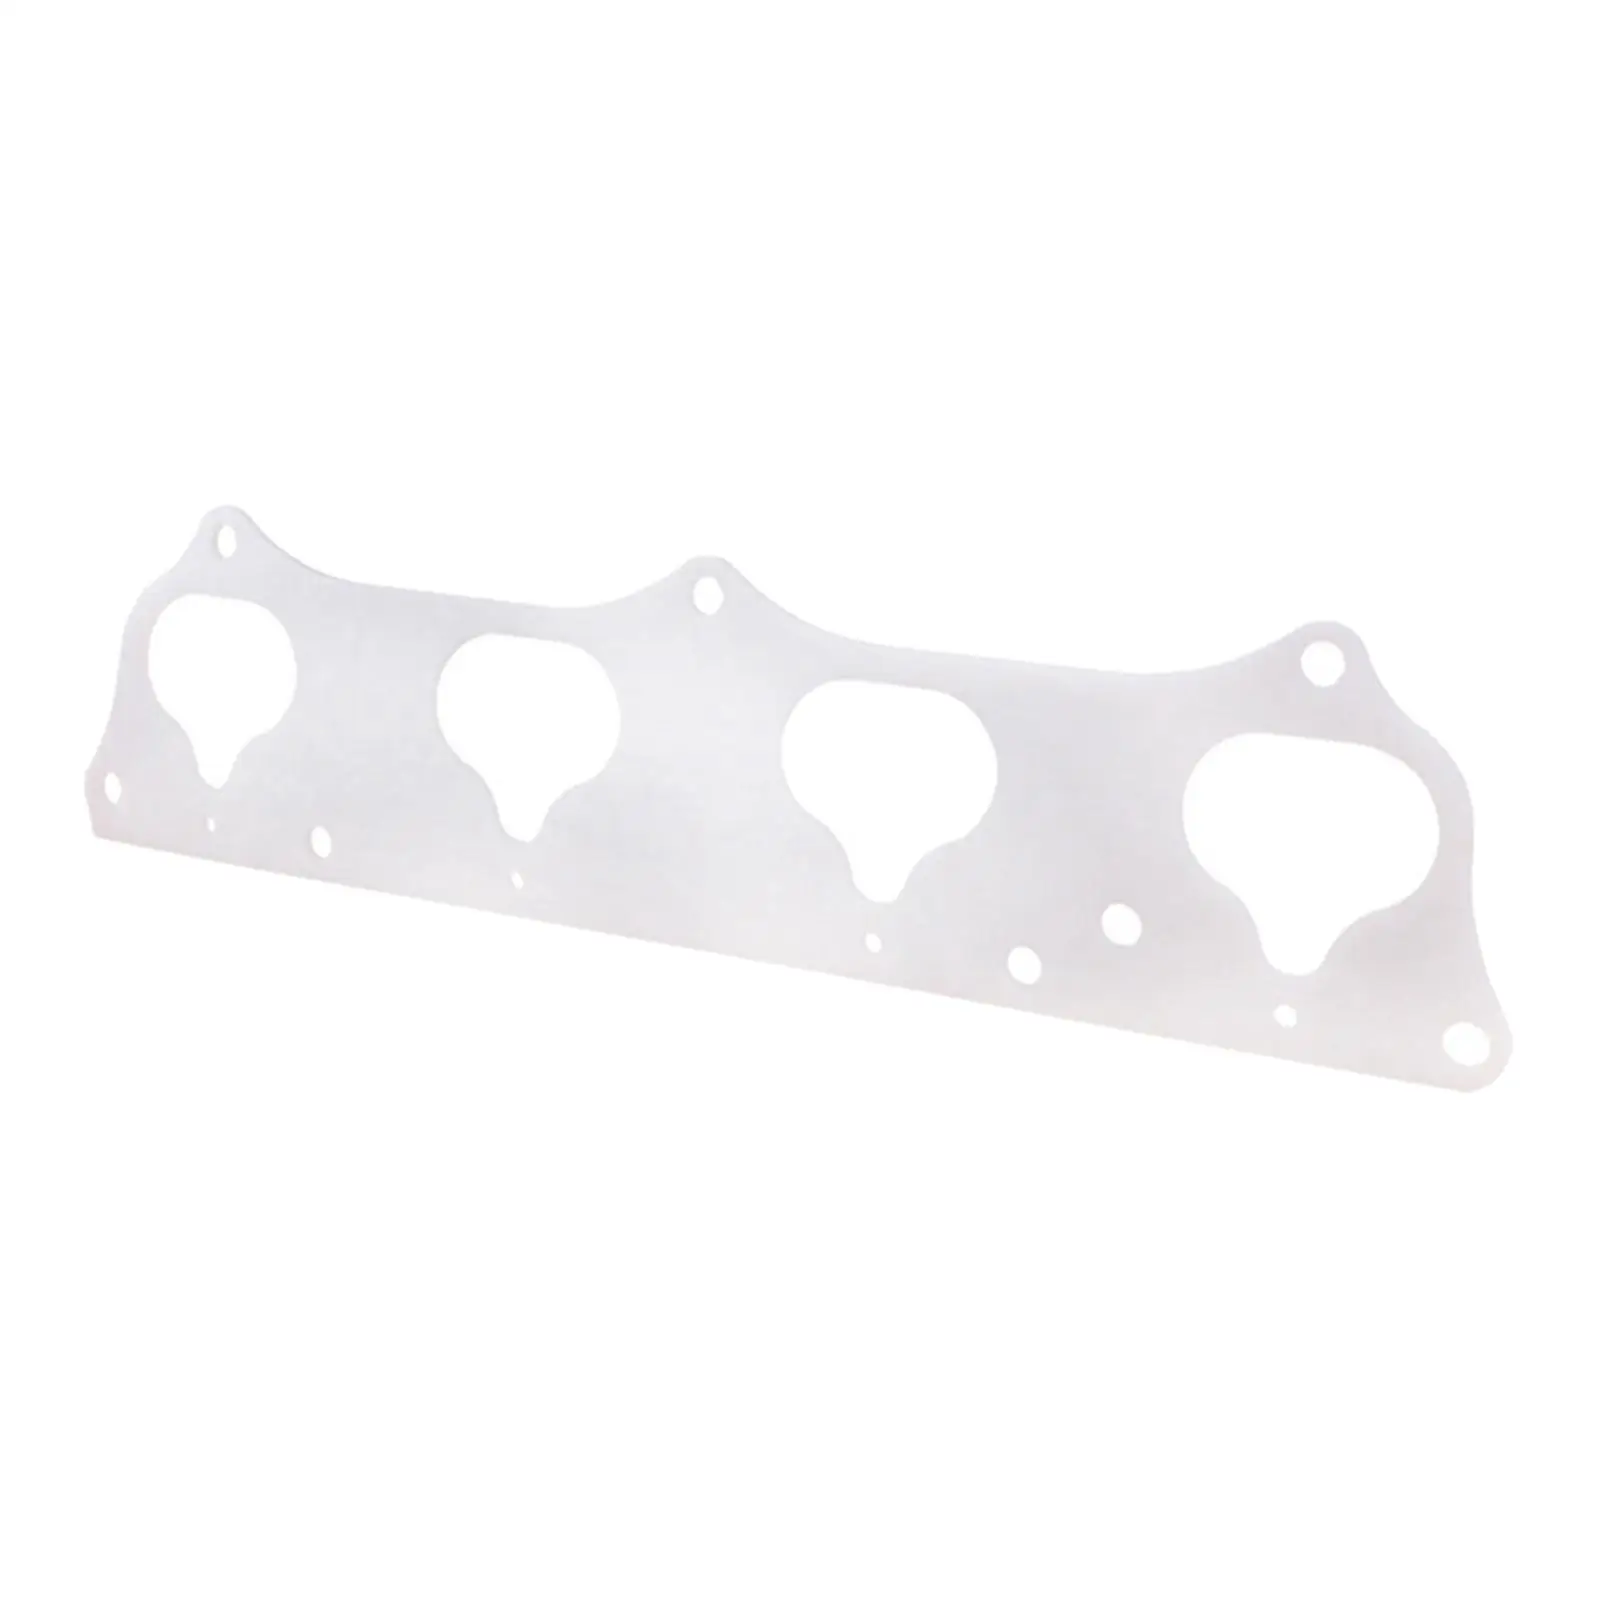 Thermal Intake Manifold Heat Shield Gasket High Performance Durable Replacement